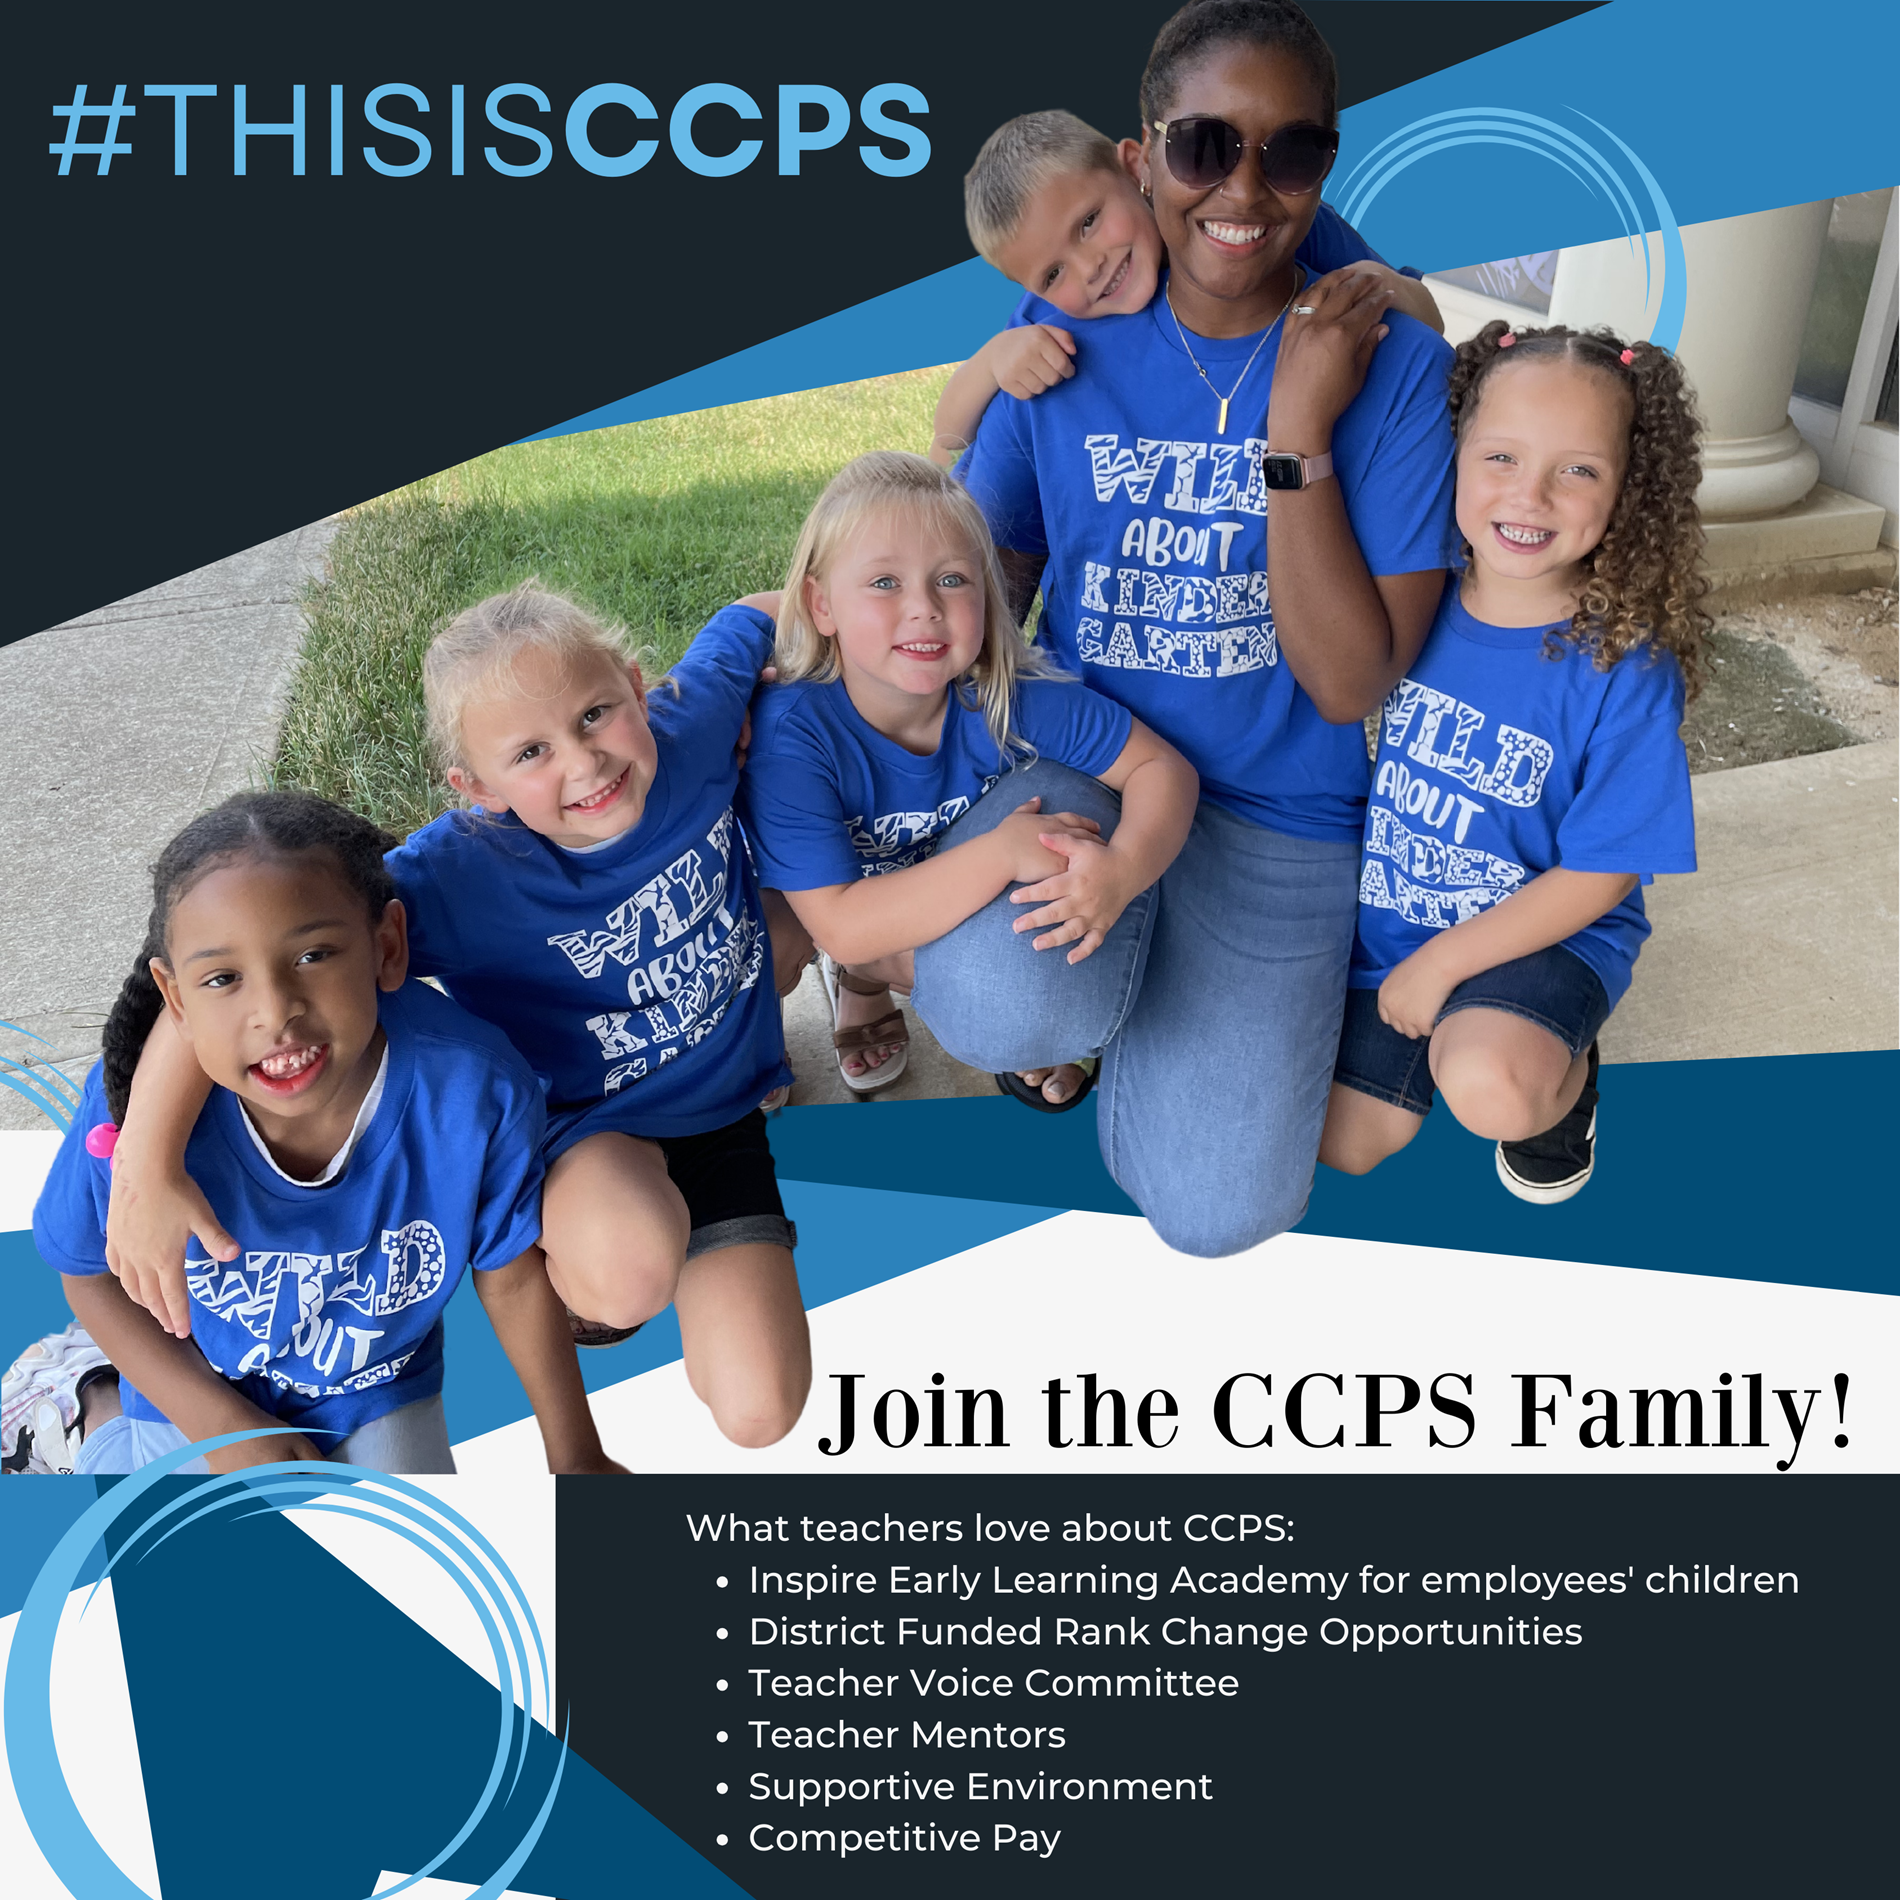 Join the CCPS Family